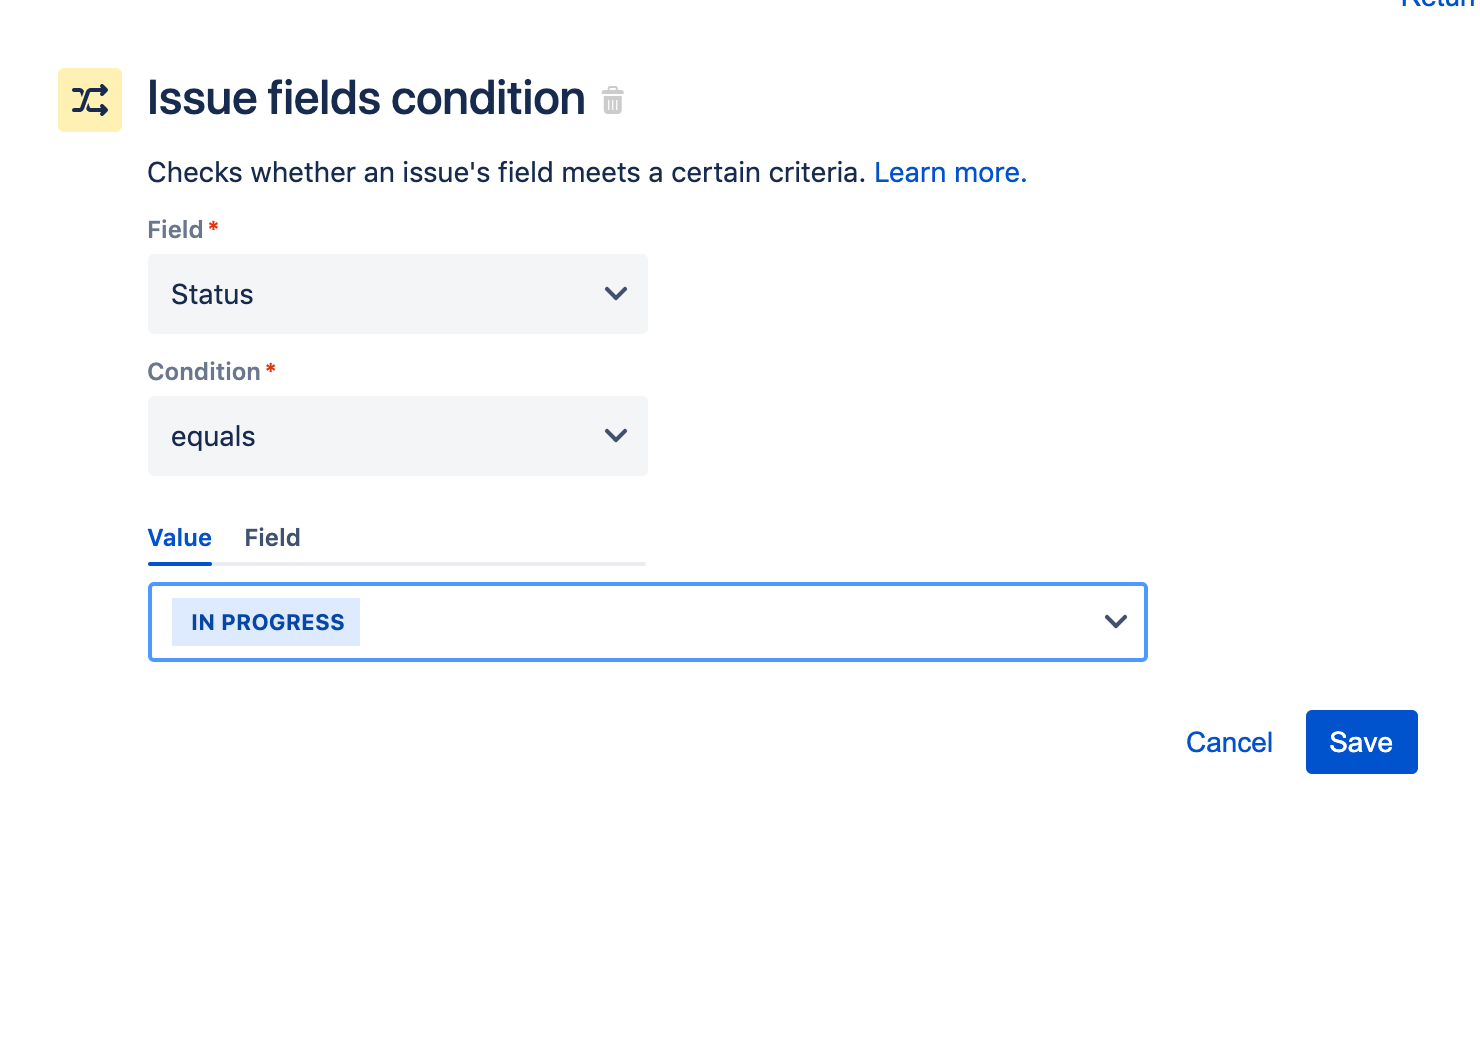 Screenshot of issue fields condition